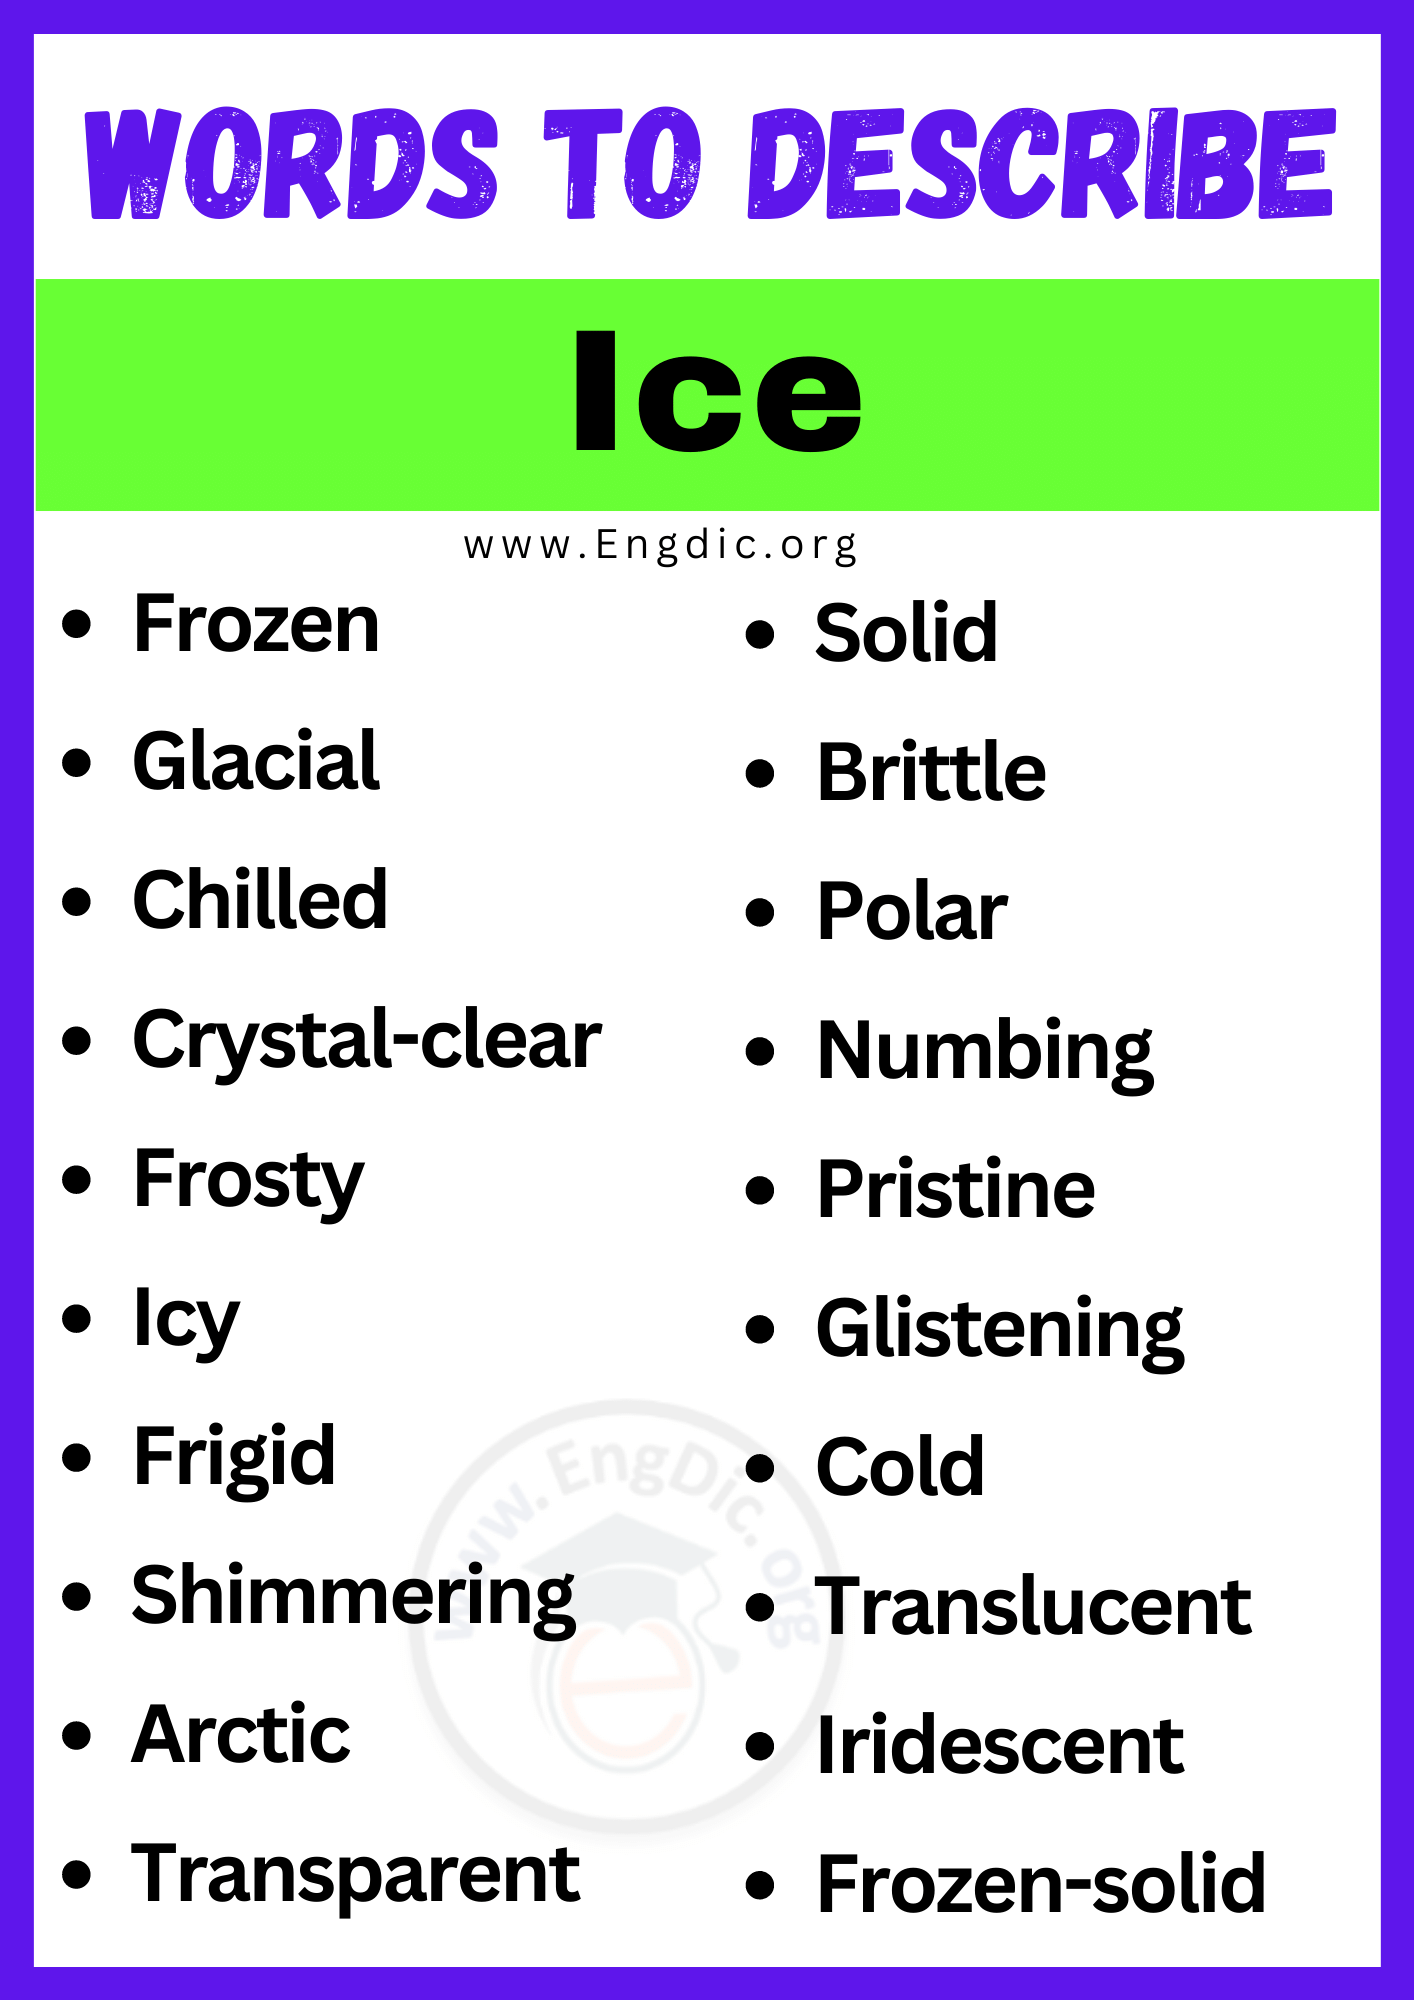 ords to Describe Ice